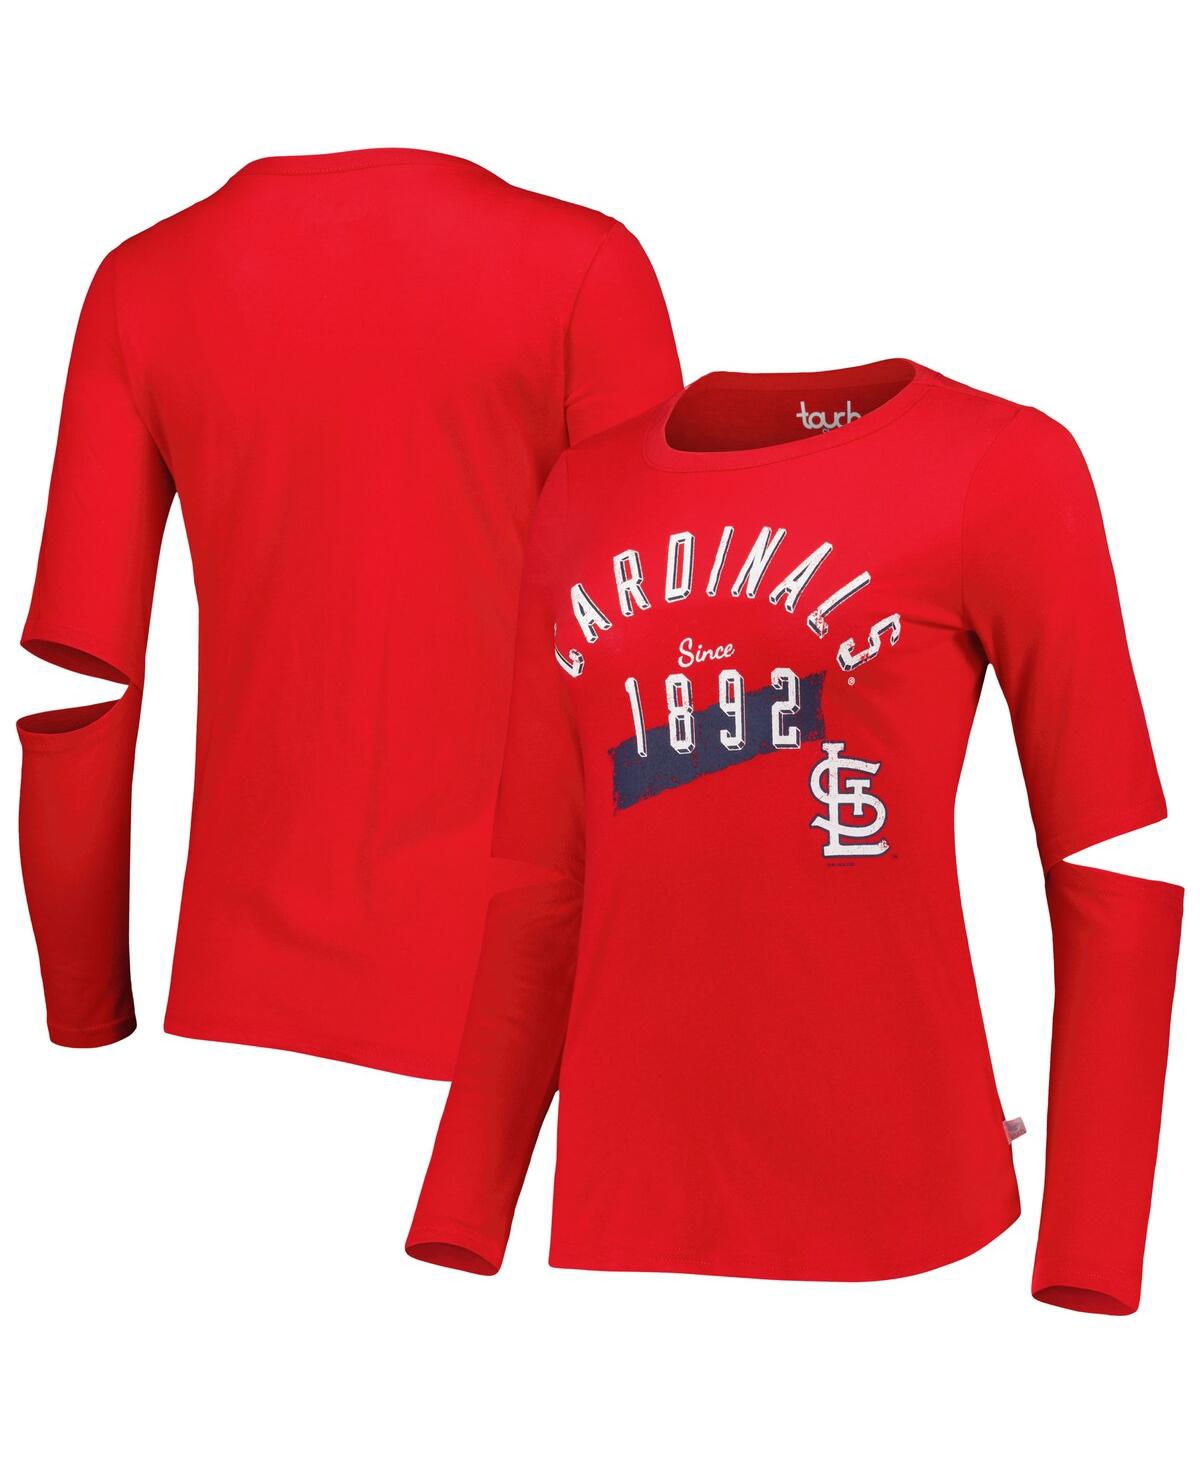 Women's Touch Red St. Louis Cardinals Formation Long Sleeve T-shirt - Red